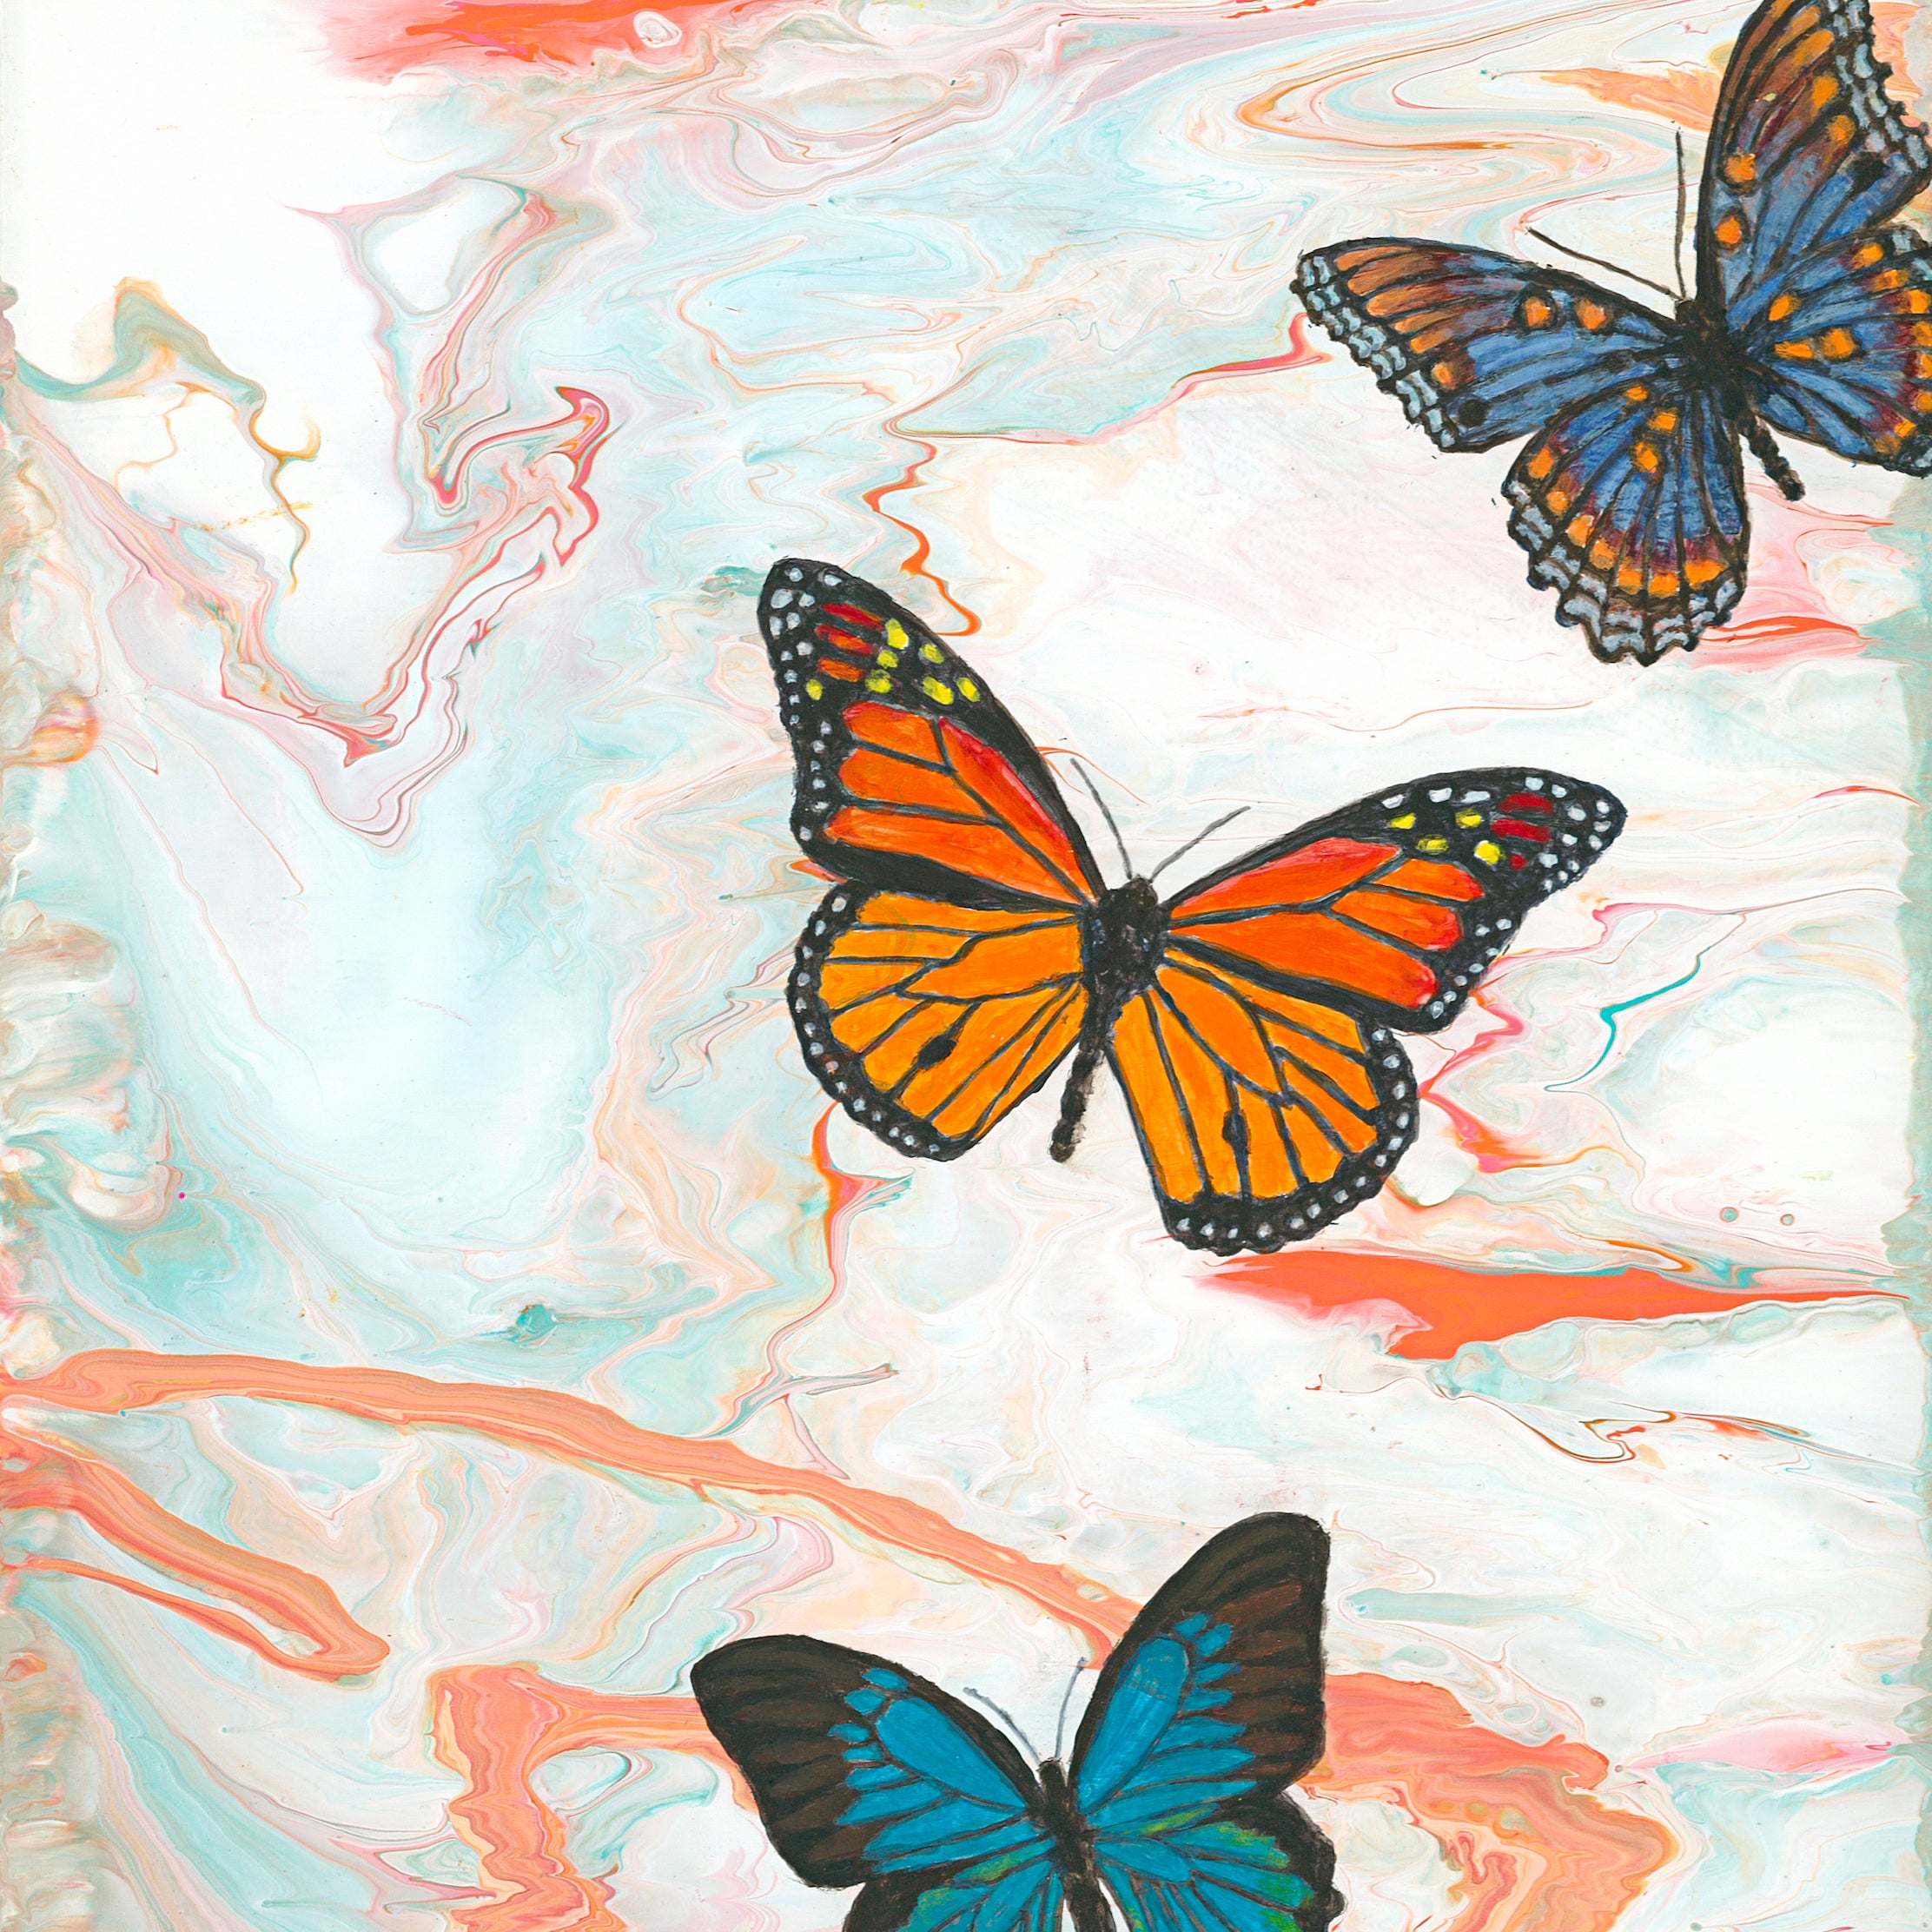 Butterfly Paintings | Butterfly Canvas Painting | Butterfly Canvas | Abstract Butterfly Art